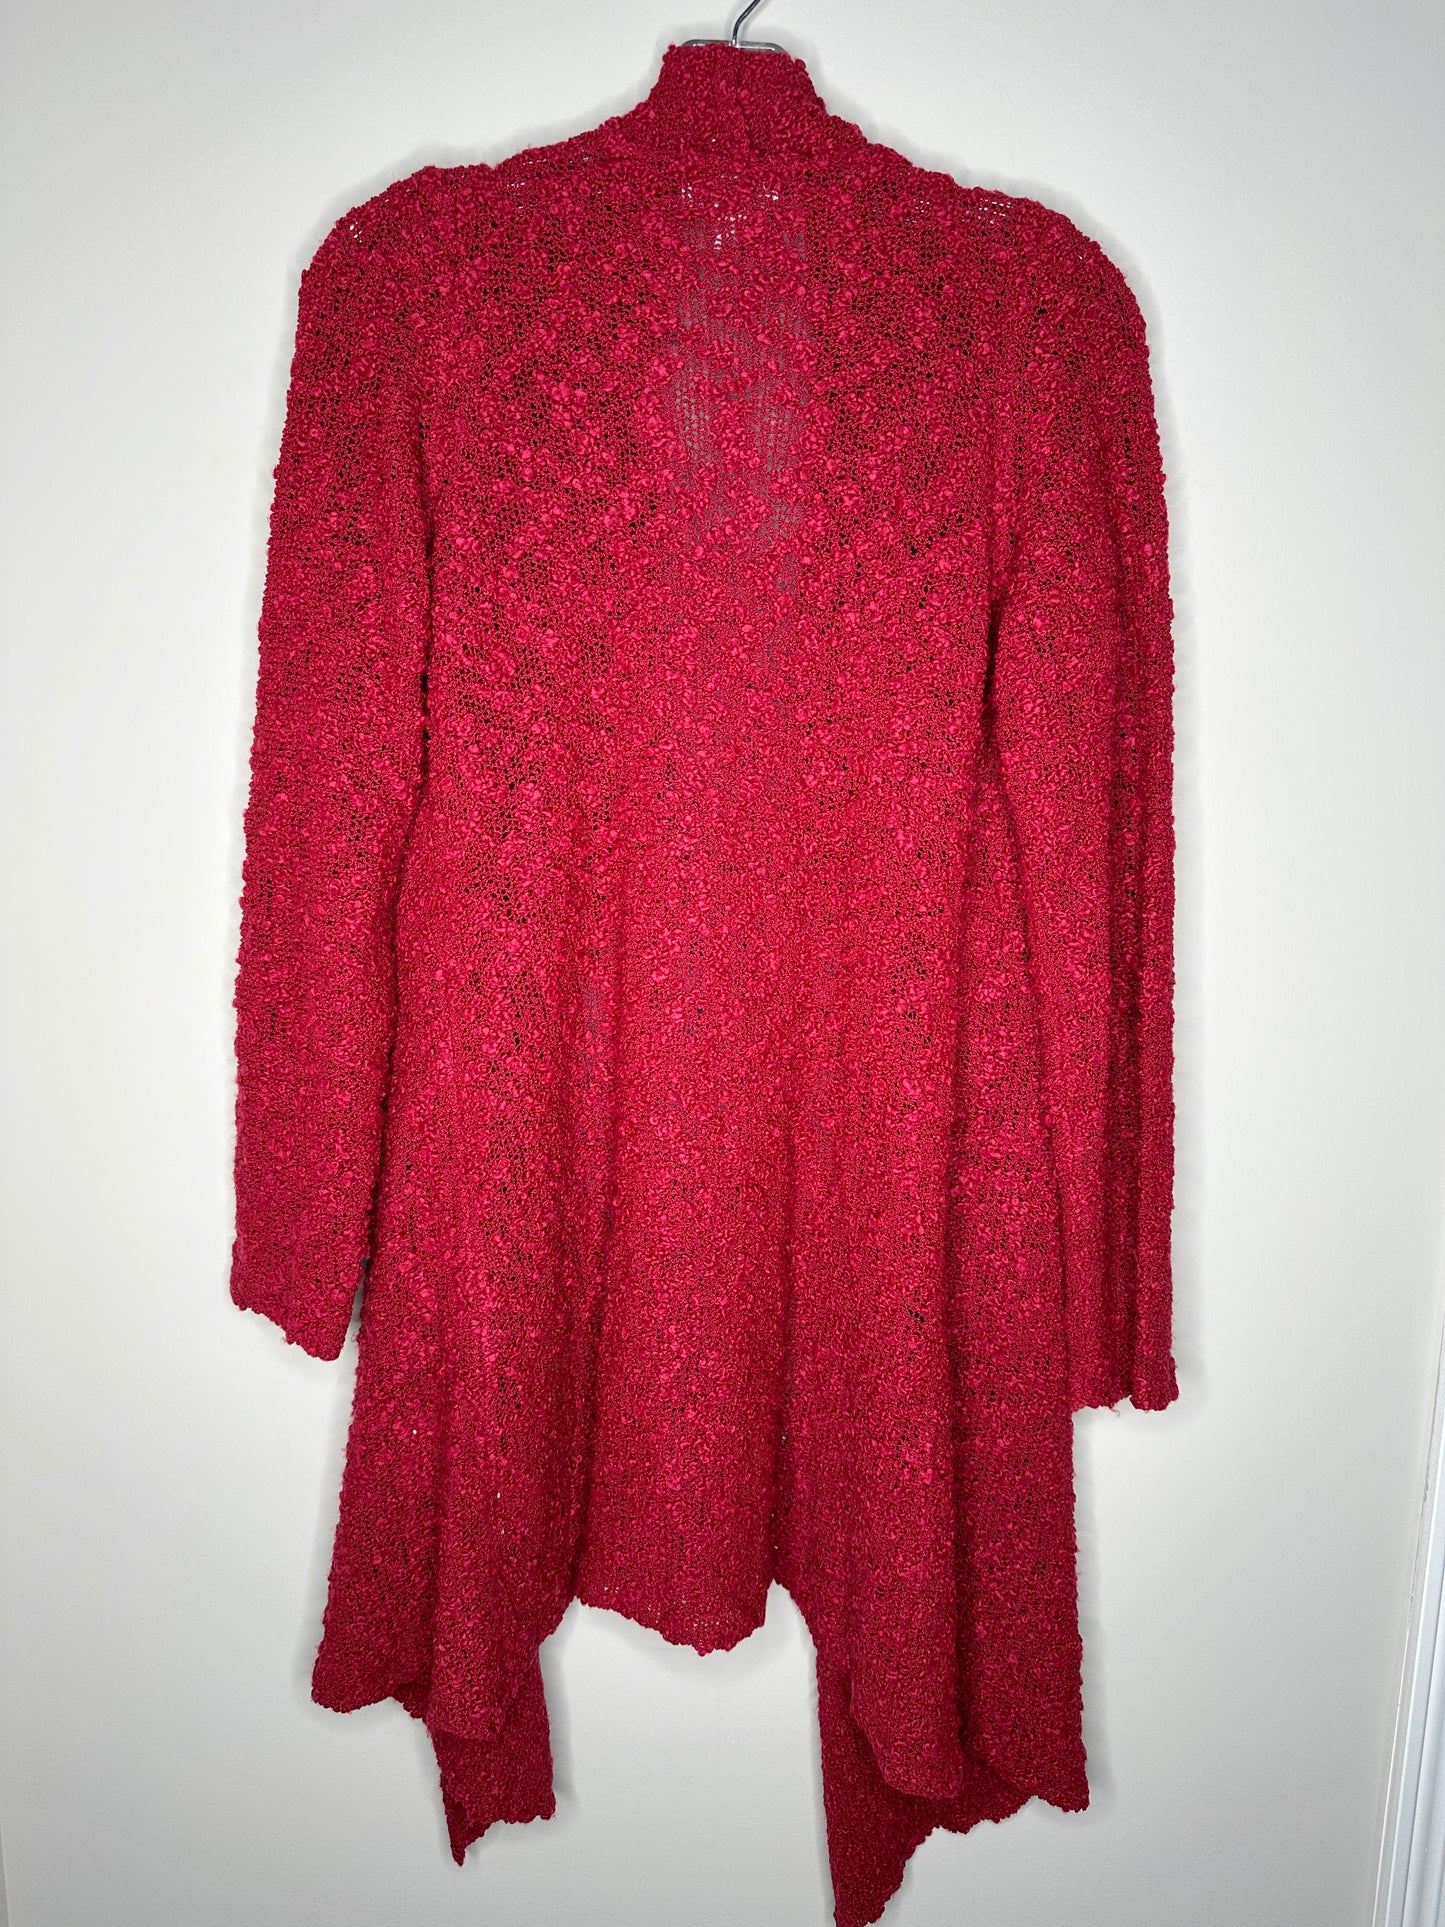 KINTAMANI by Wind River Size S Dark Red Maroon Chunky Boucle Knit Open Cardigan Sweater